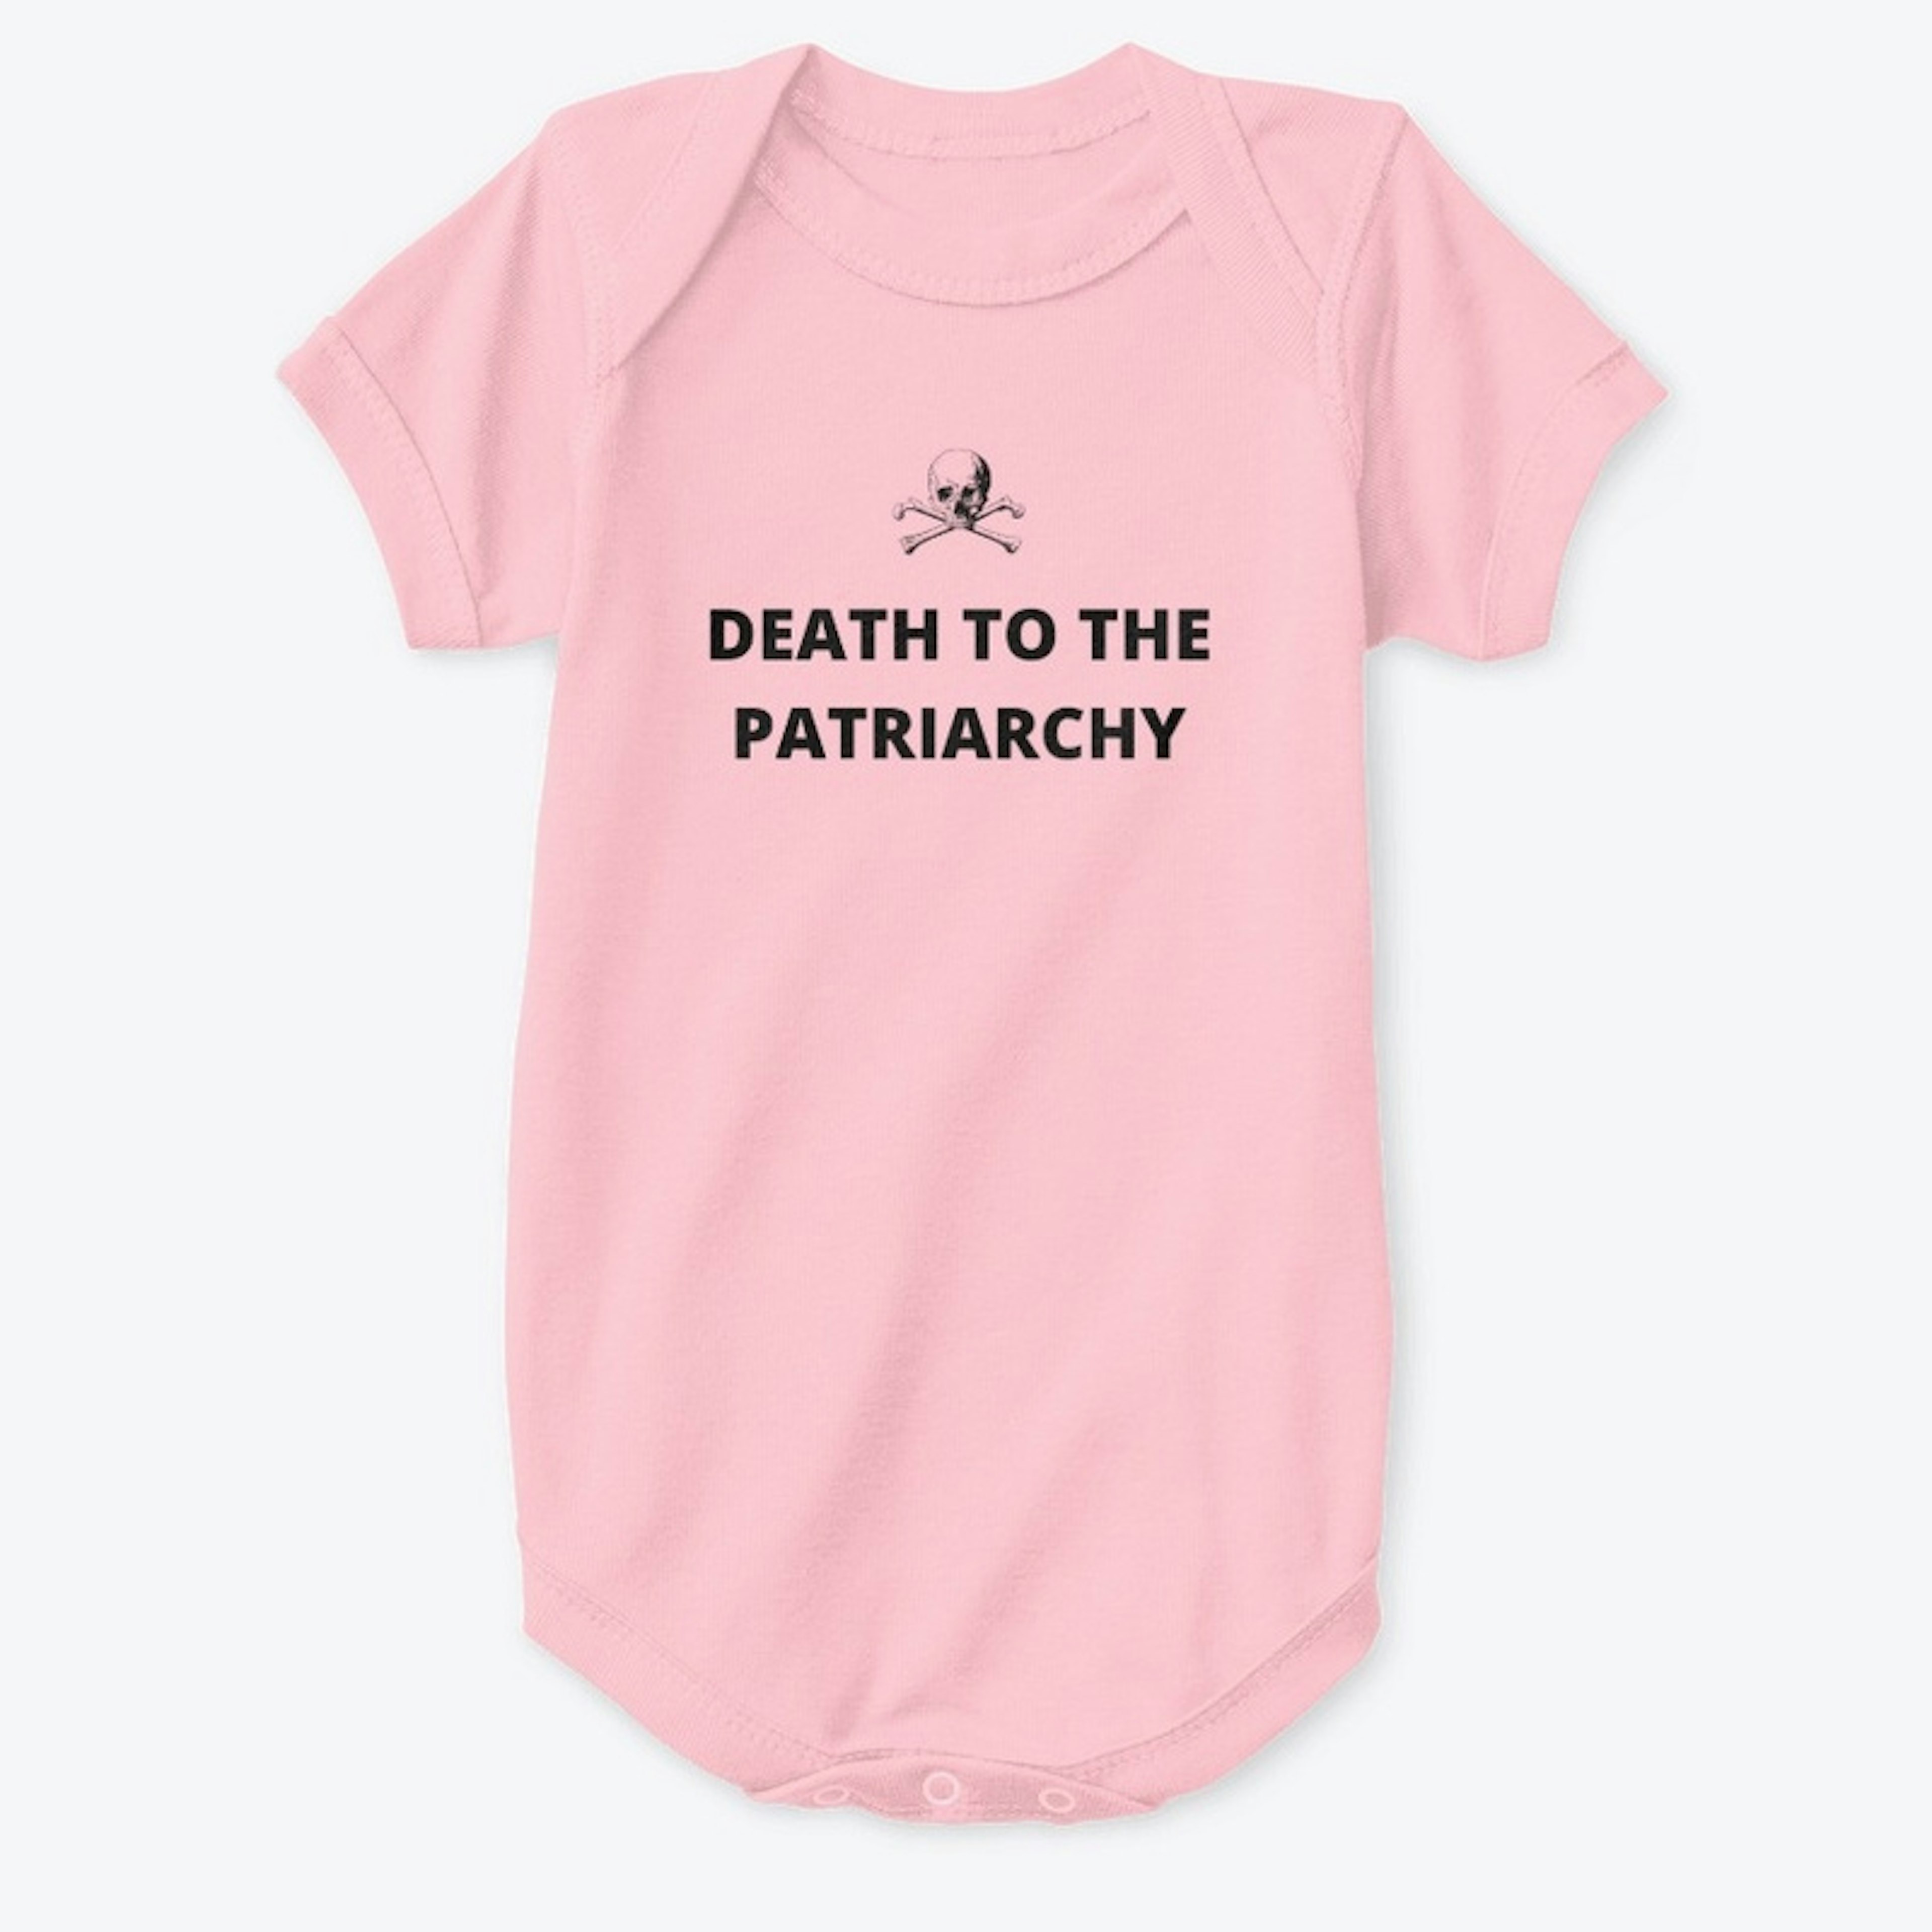 Death to the Patriarchy